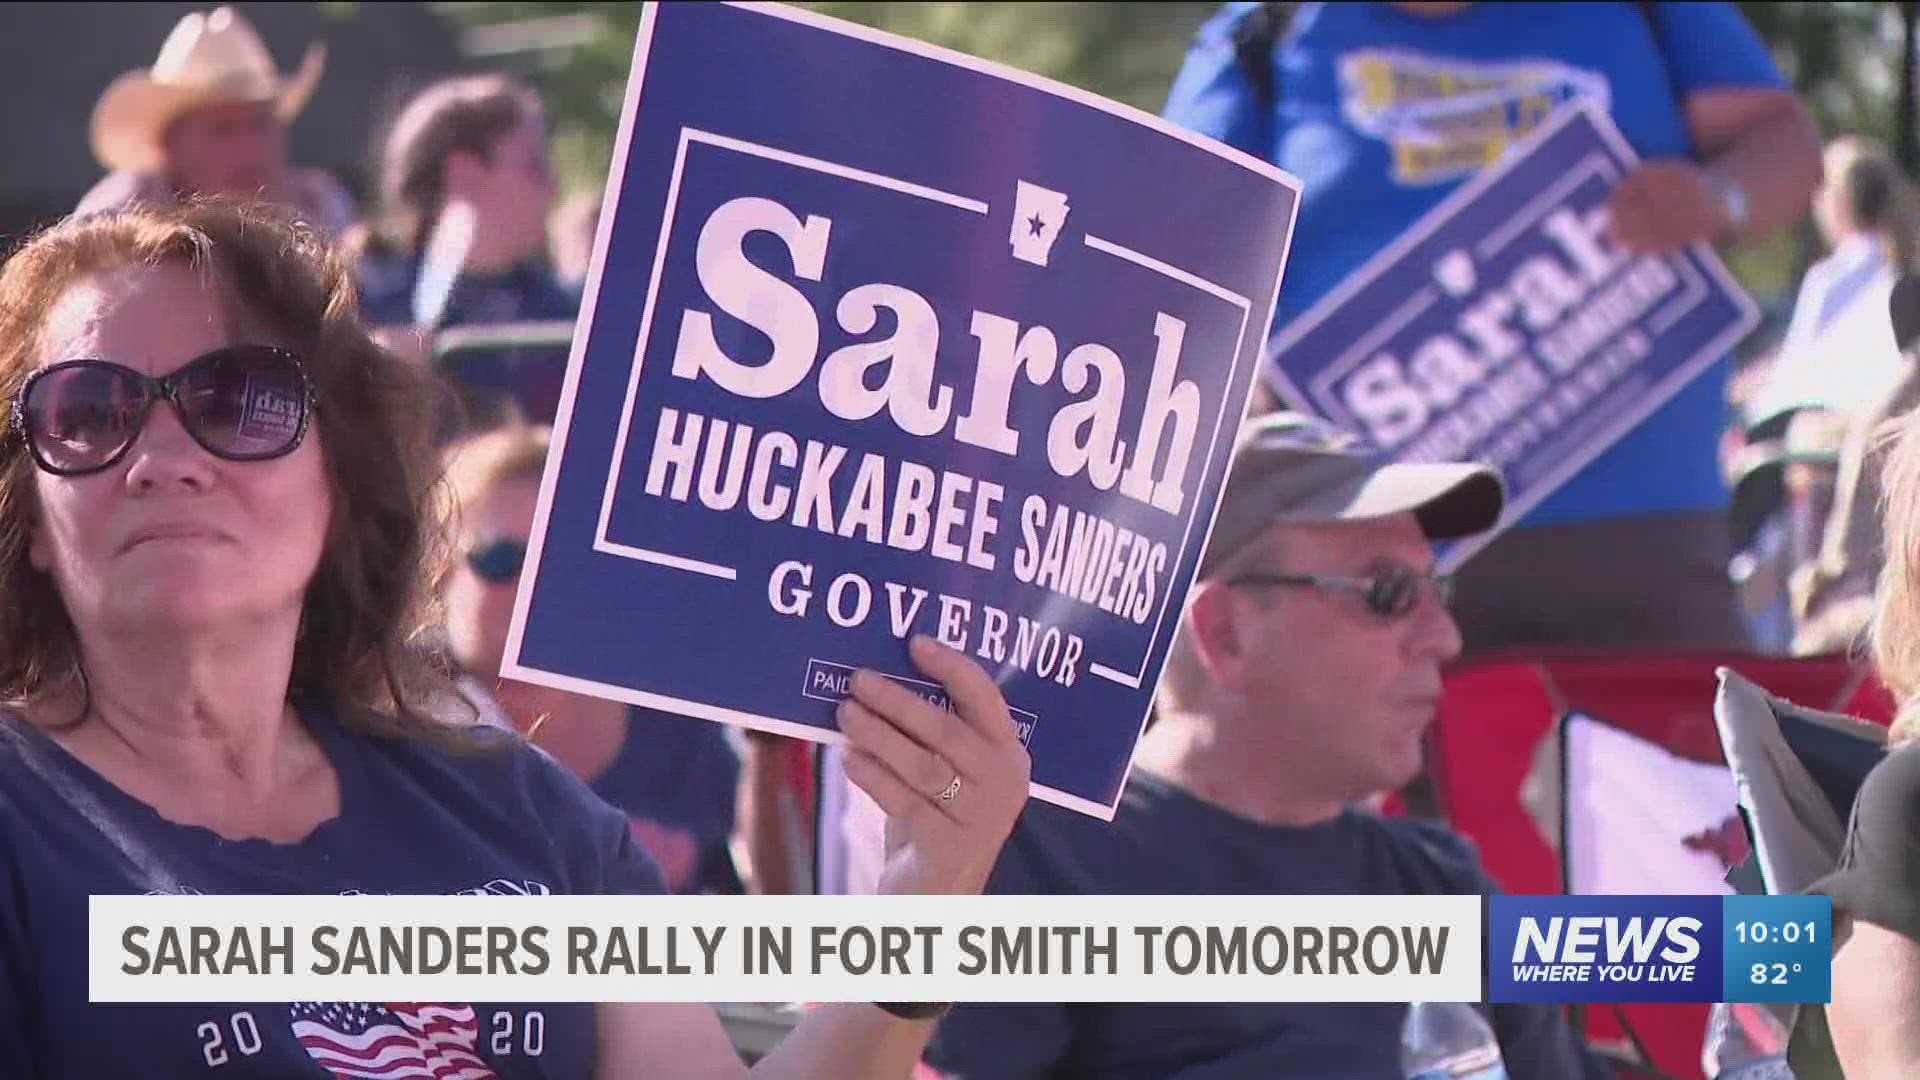 The Sanders rally will begin at 5:30 p.m. at the Riverfront Amphitheater on Sept. 7 and is open to the public.